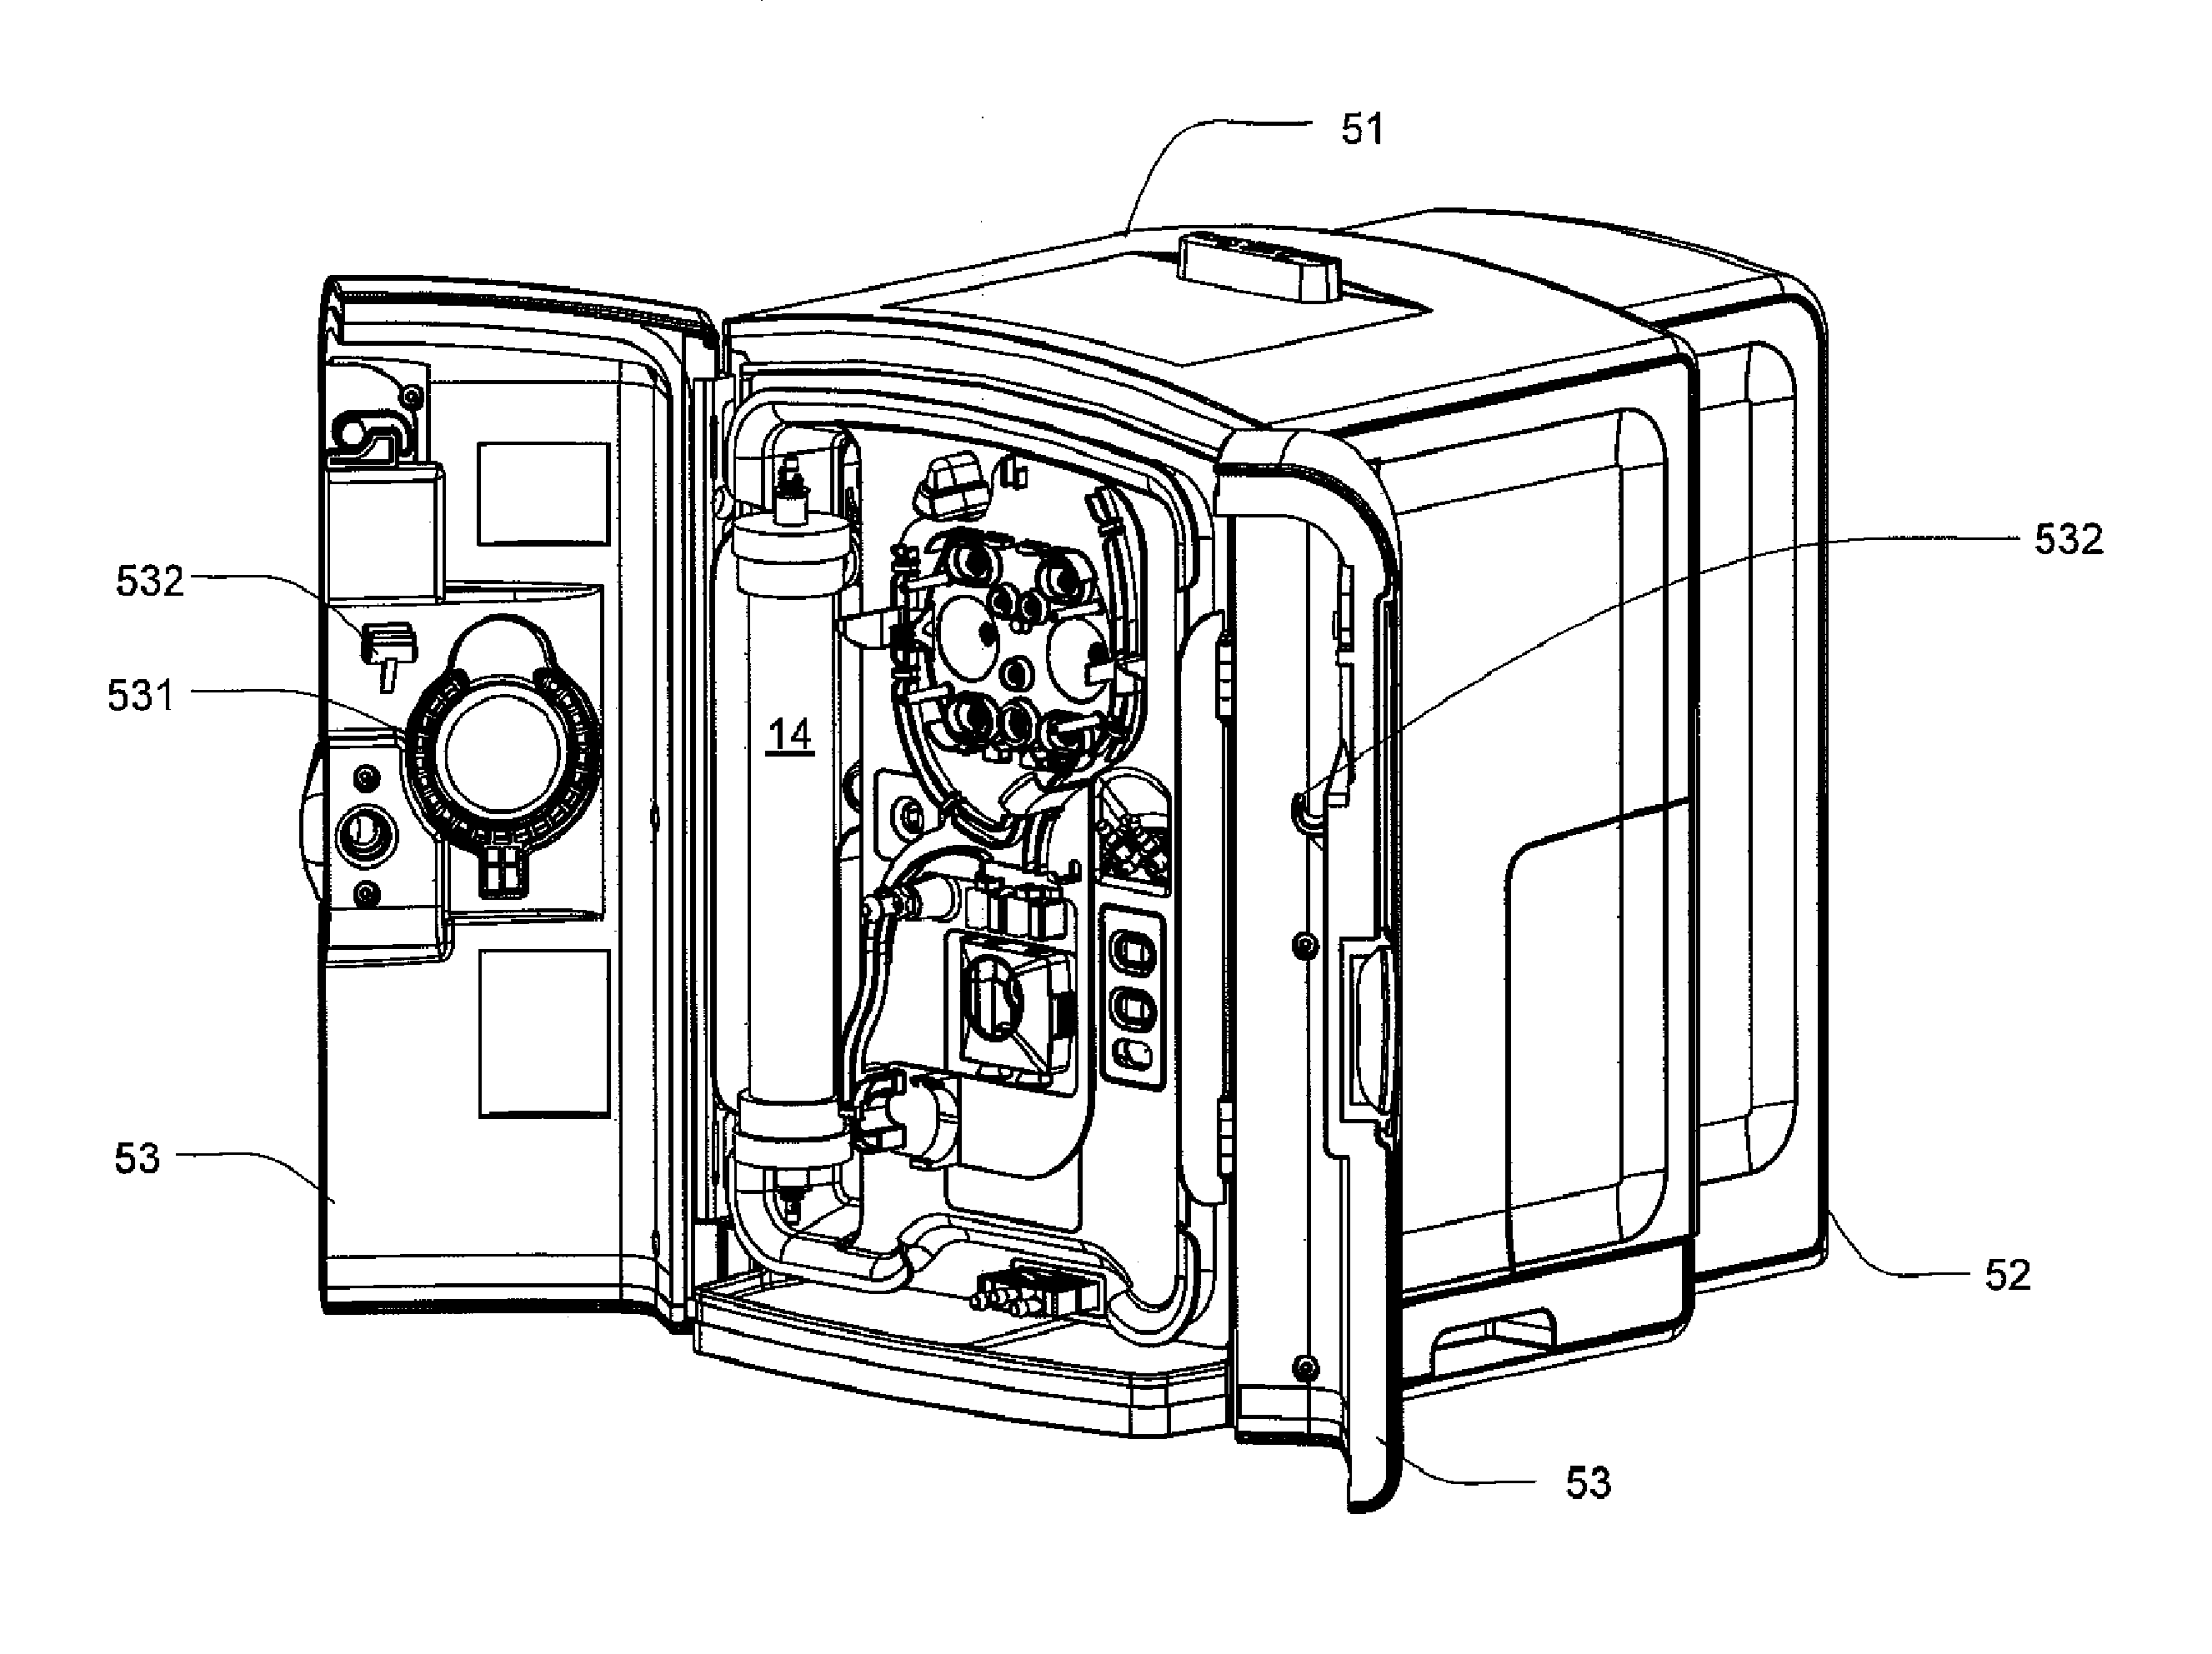 Modular assembly for a portable hemodialysis system